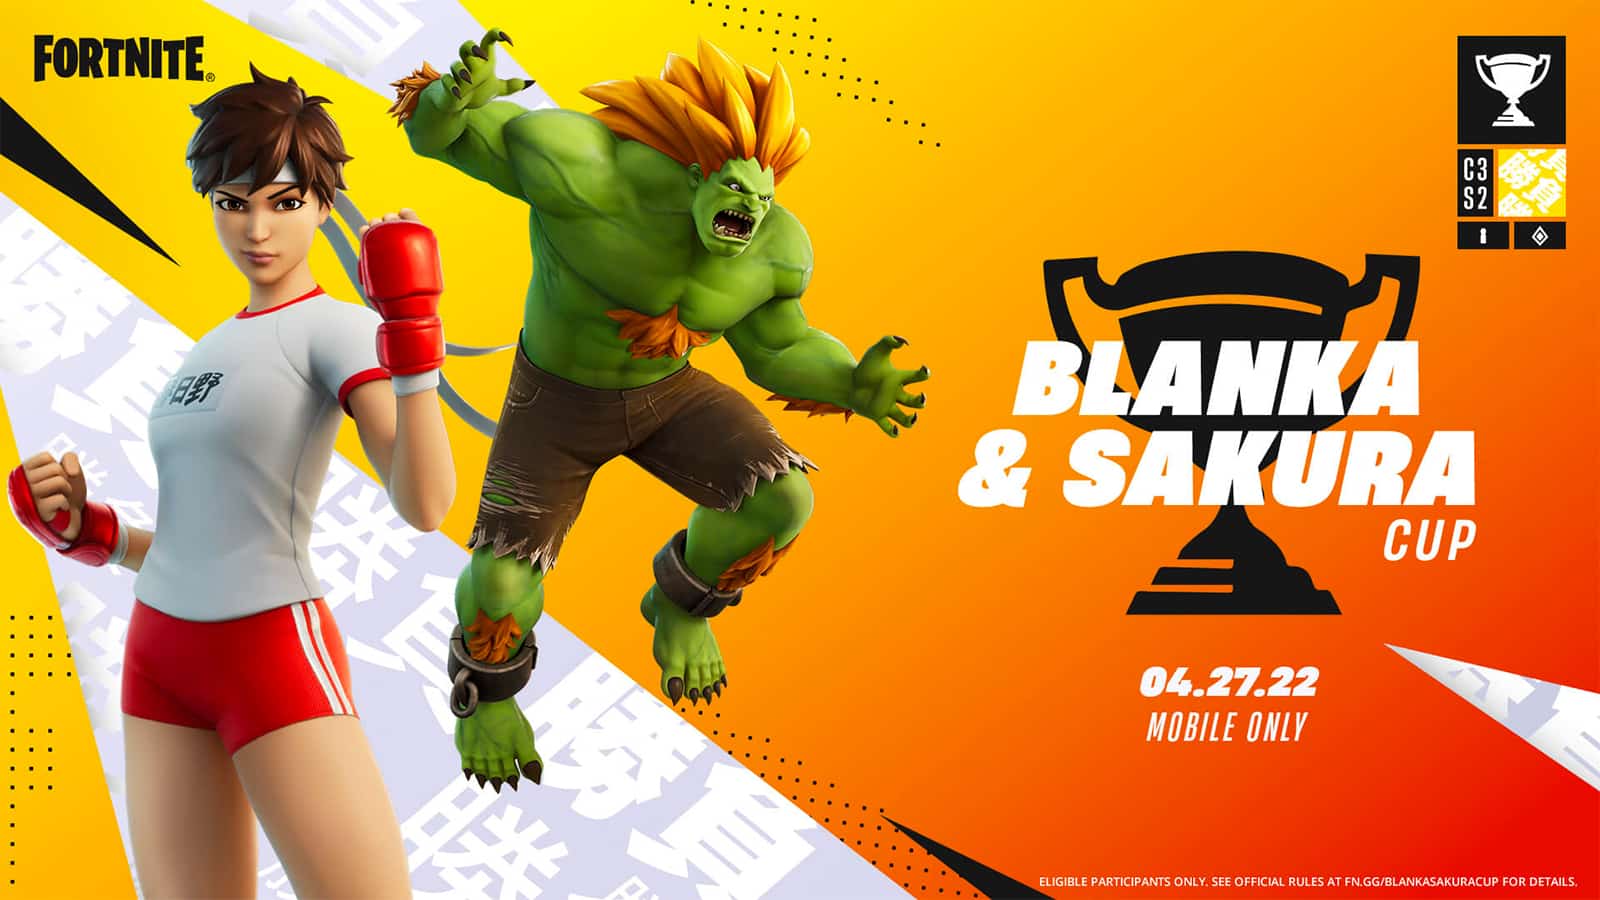 A poster for the Fortnite Blanka and Sakura Cup